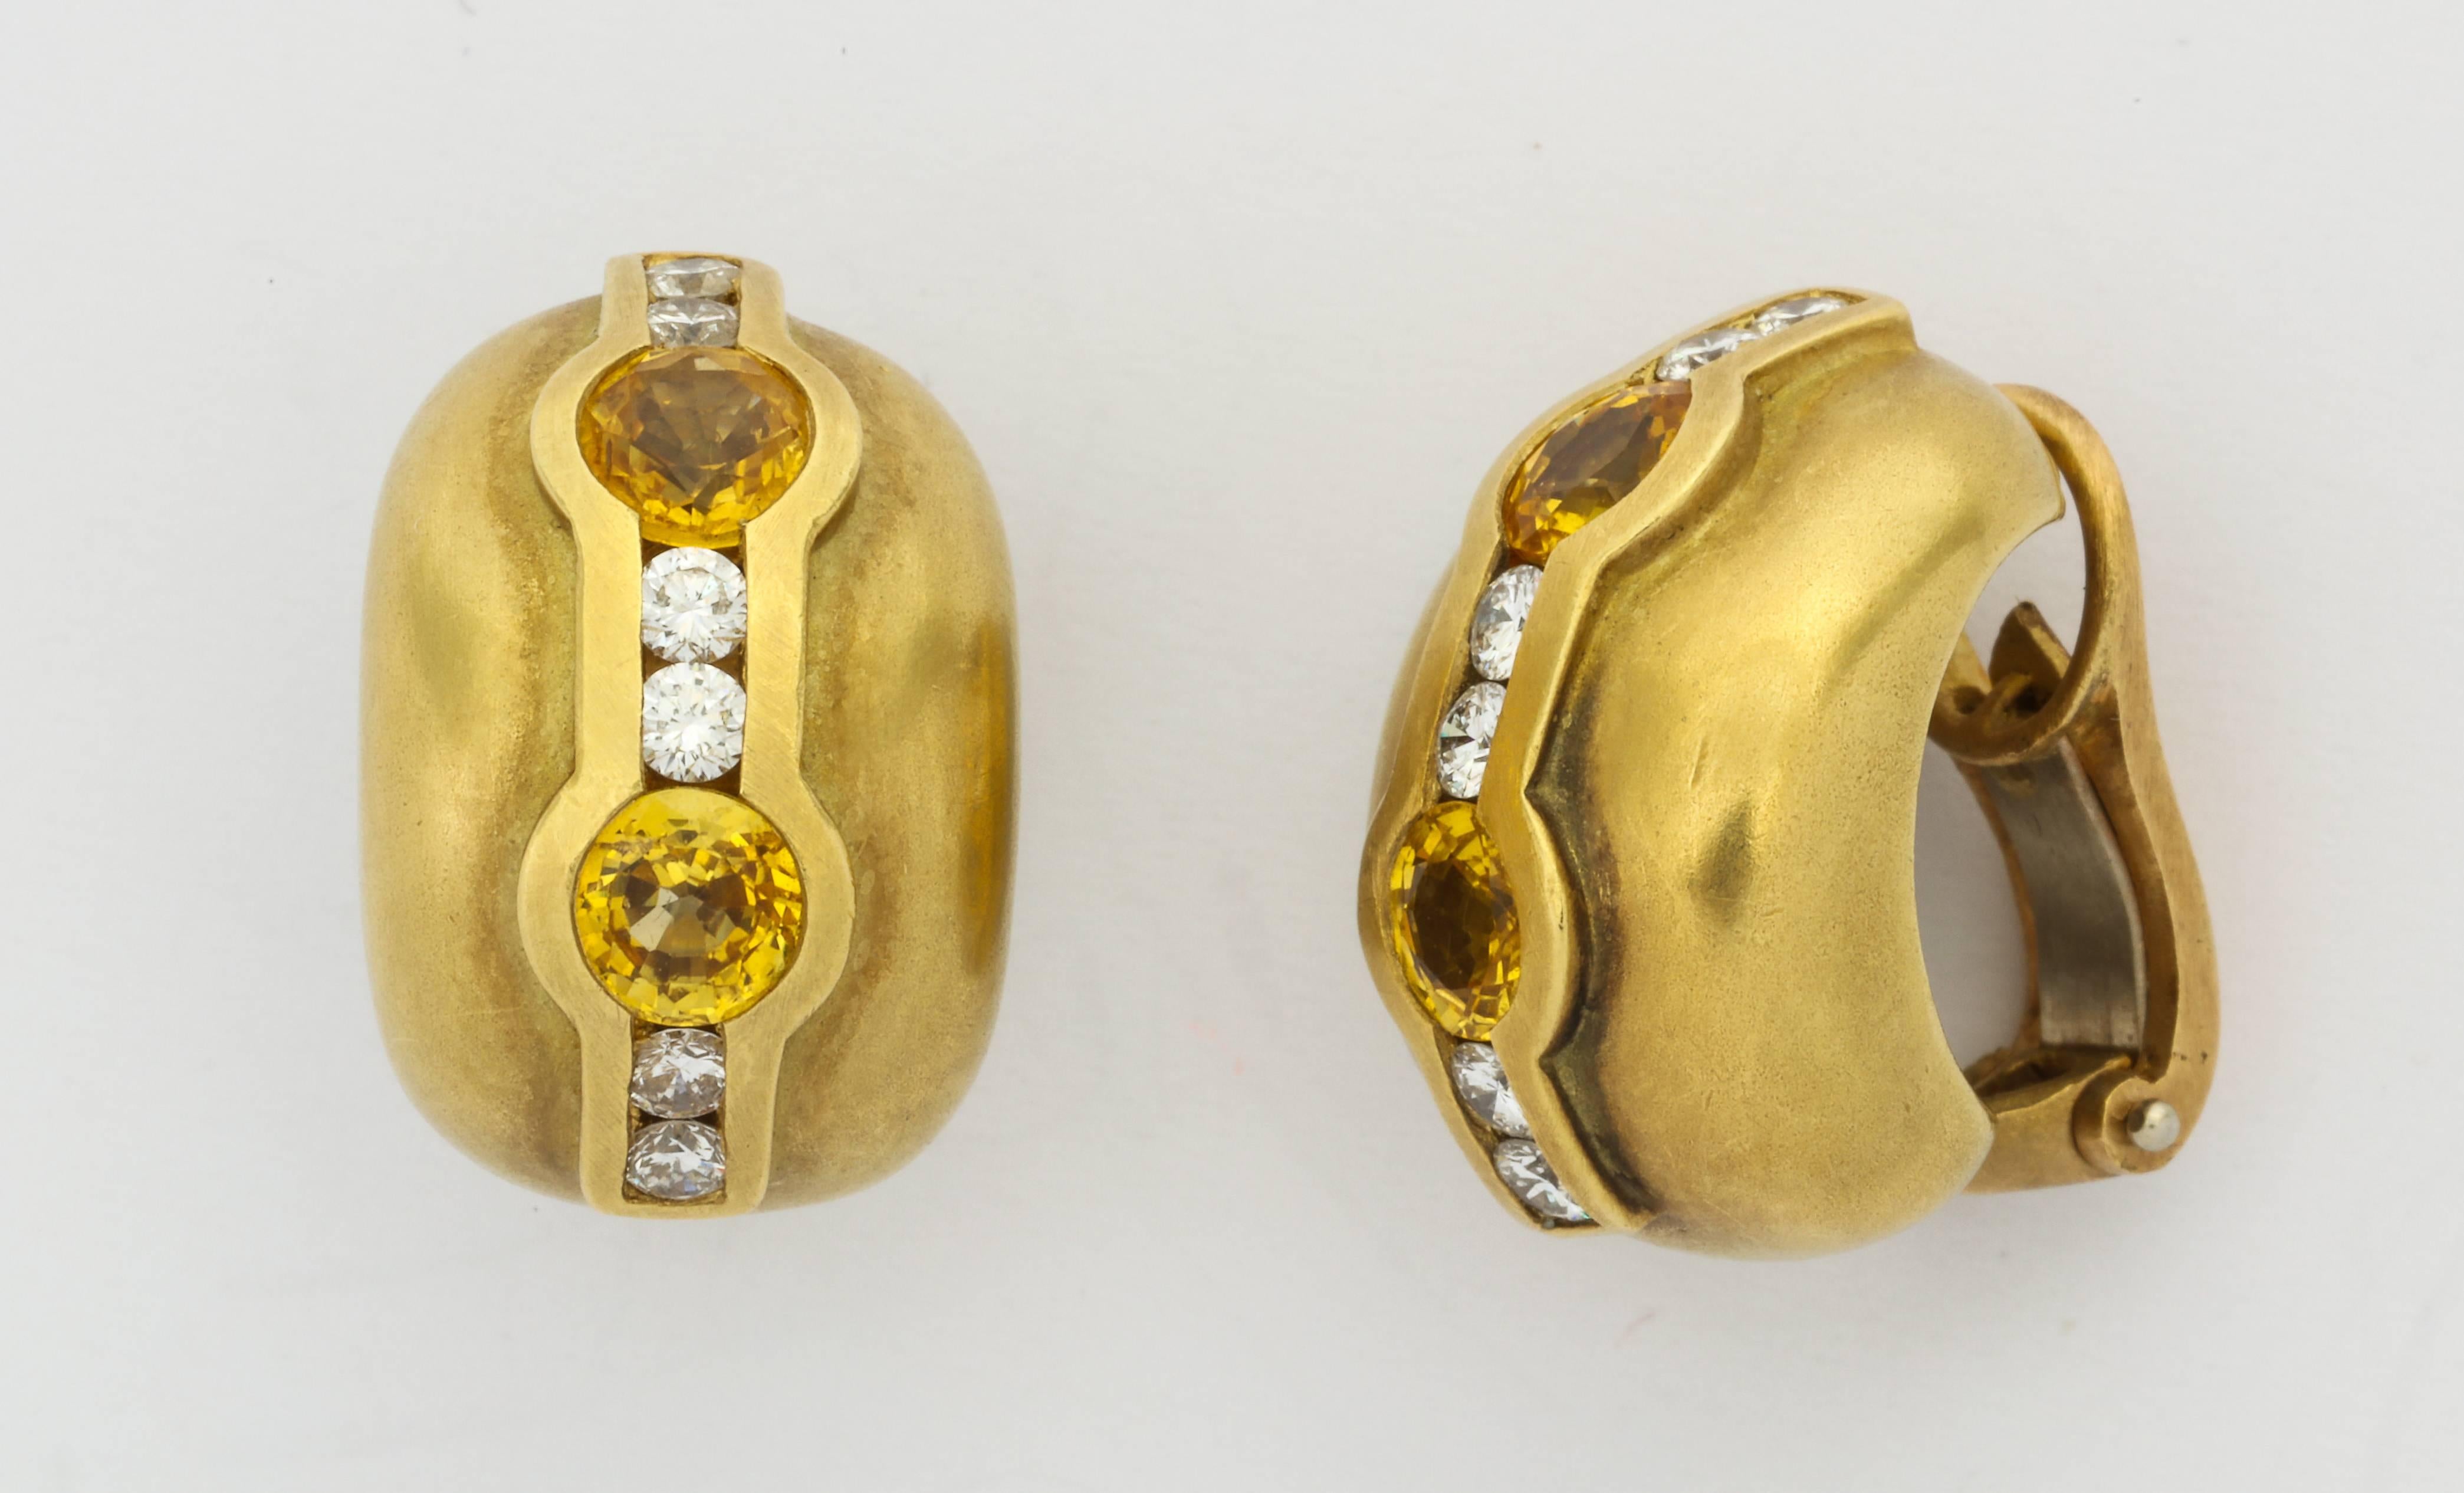 Simple and eye-catching 1997 design by award winning Barry Kieselstein Cord, of satin finished 18K gold set with sparkling natural yellow and white diamonds. Date and gold mark, and makers mark. 